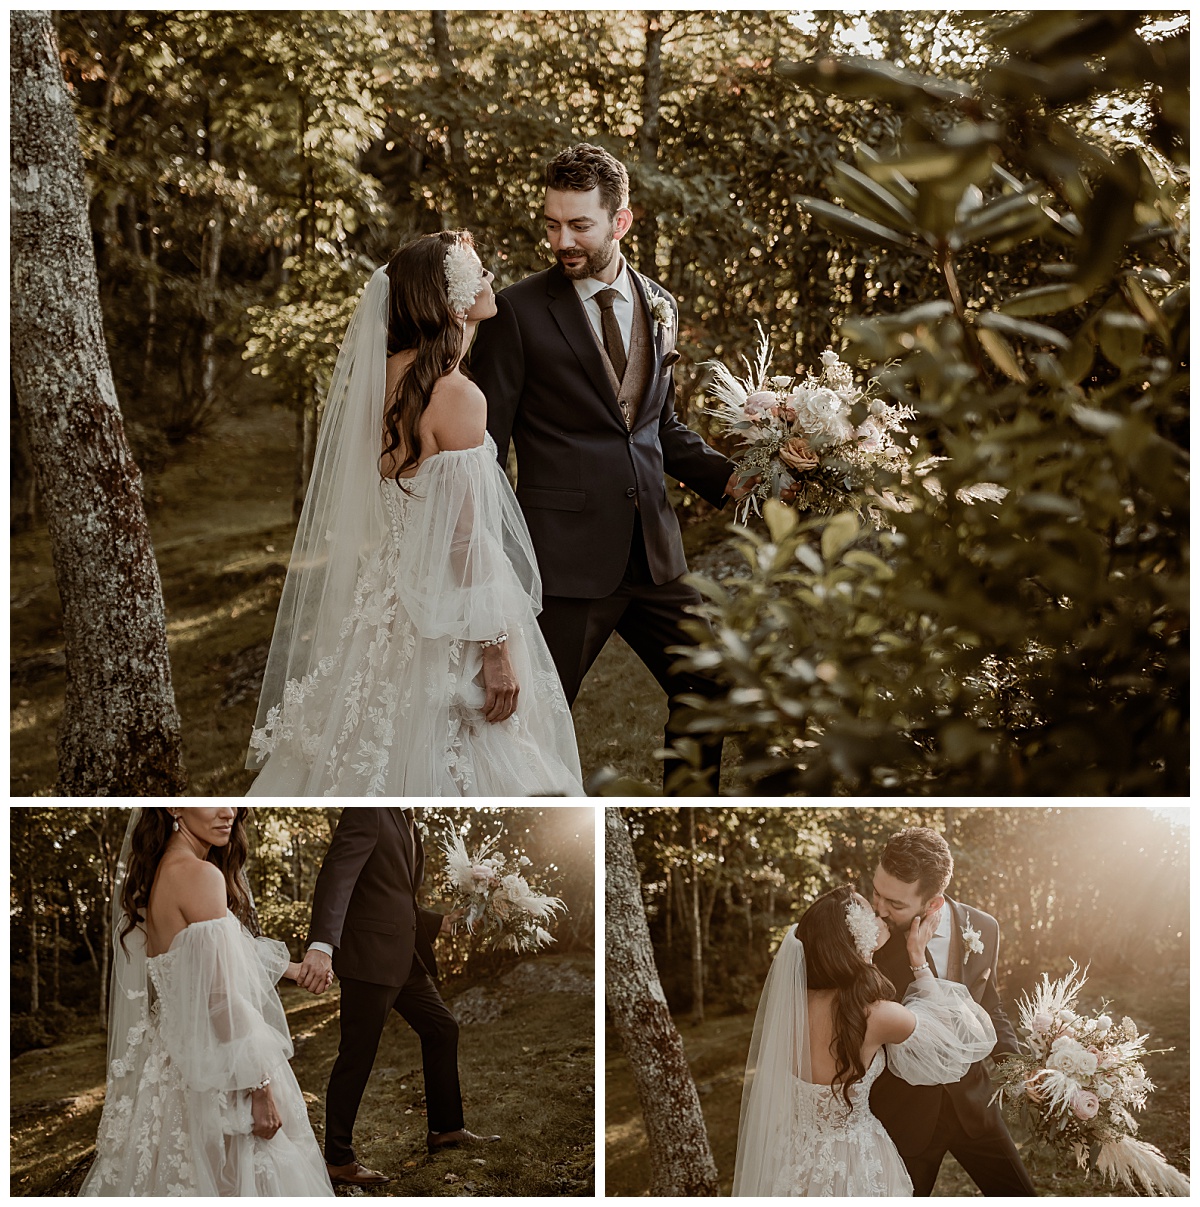 Enchanting wedding portraits of bride and groom at the Twickenham House in Jefferson, NC taken by Paisley Sunshine Studios. 